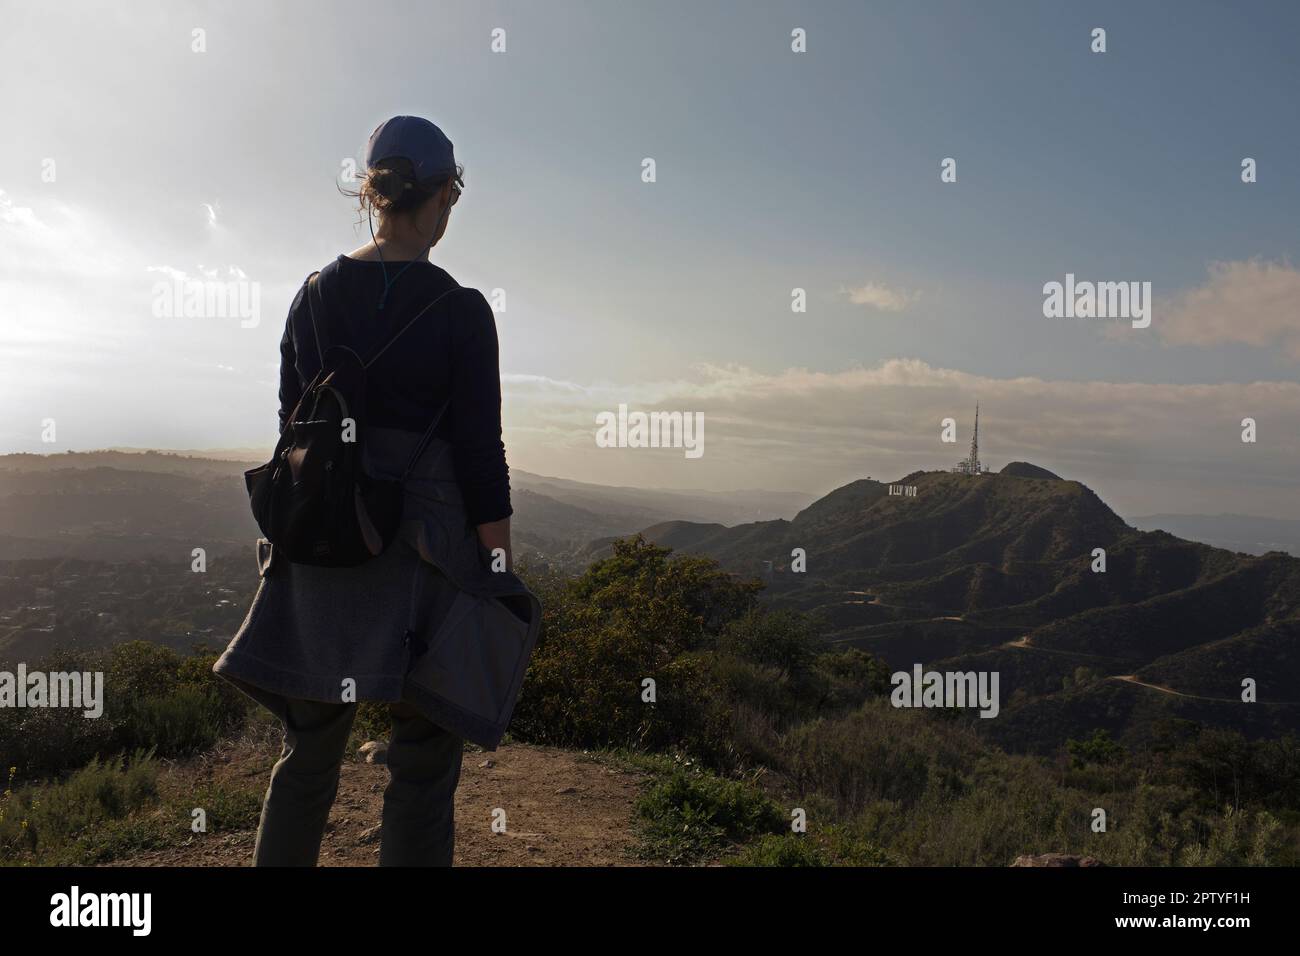 Vista posteriore di Hiker Viewing Hollywood Sign e Santa Monica Mountains in The Distance, Los Angeles, California, USA Foto Stock